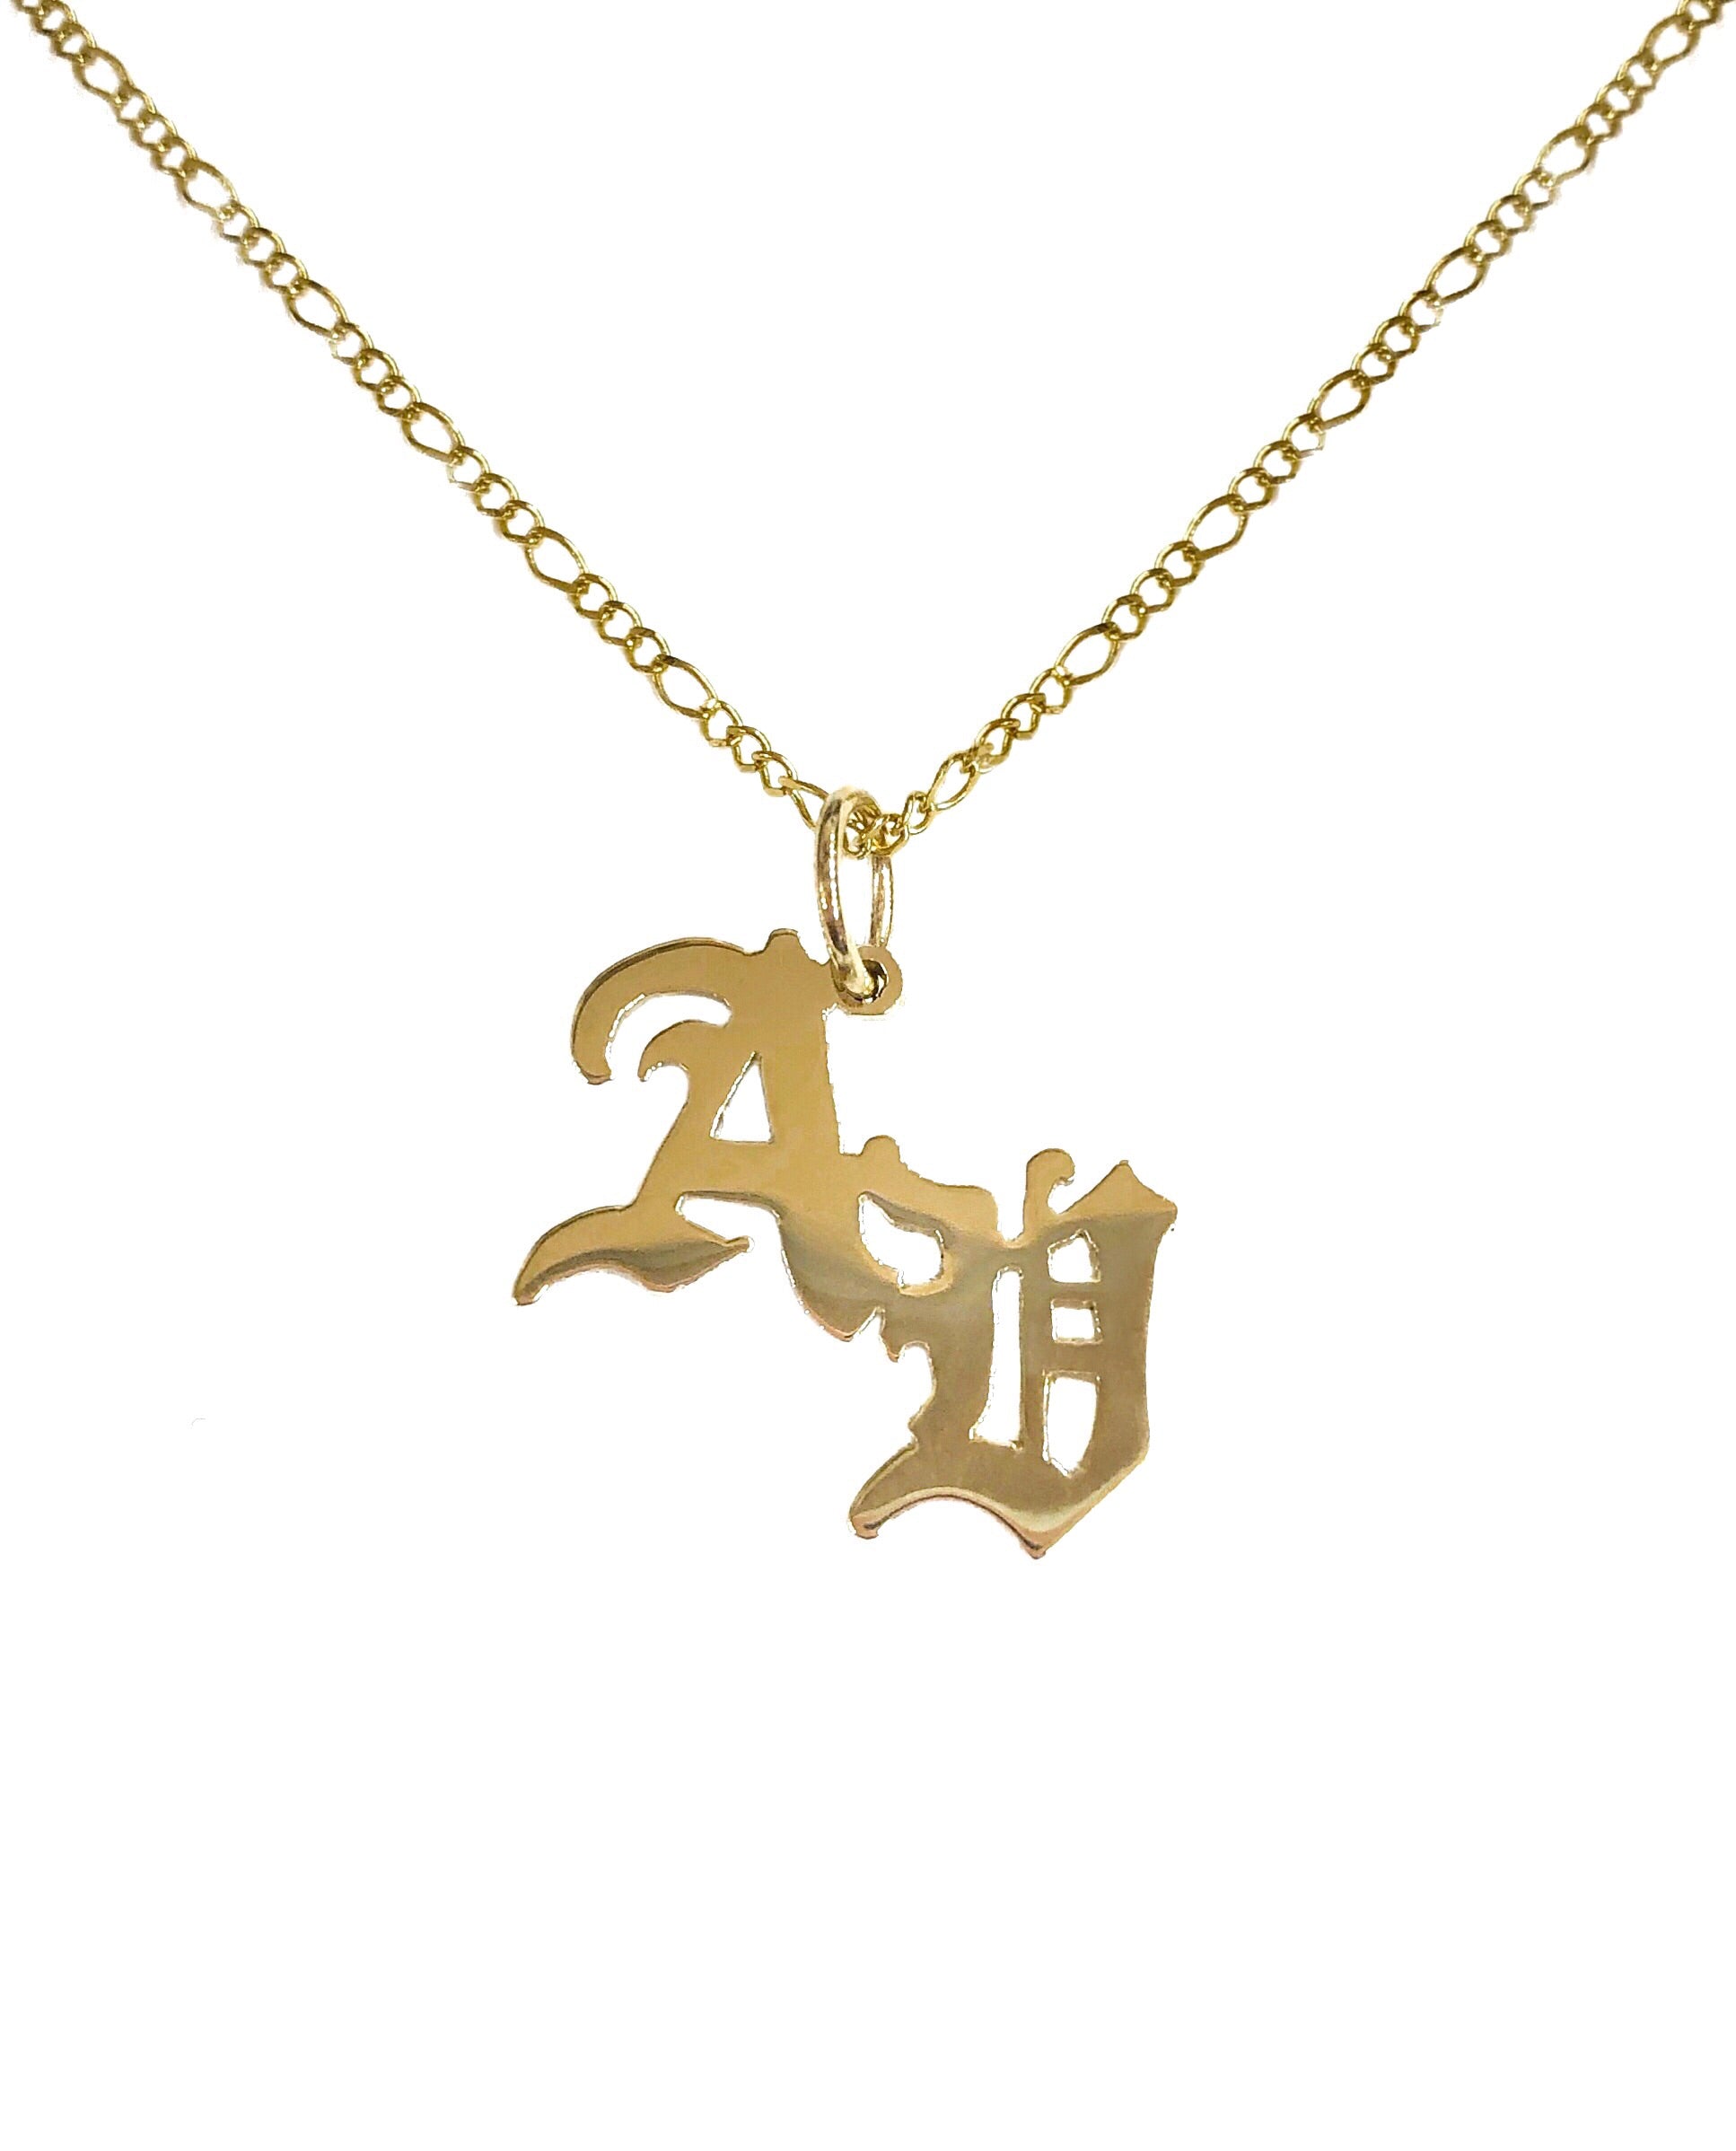 14K YELLOW GOLD OLD ENGLISH DROP INITIALS NECKLACE